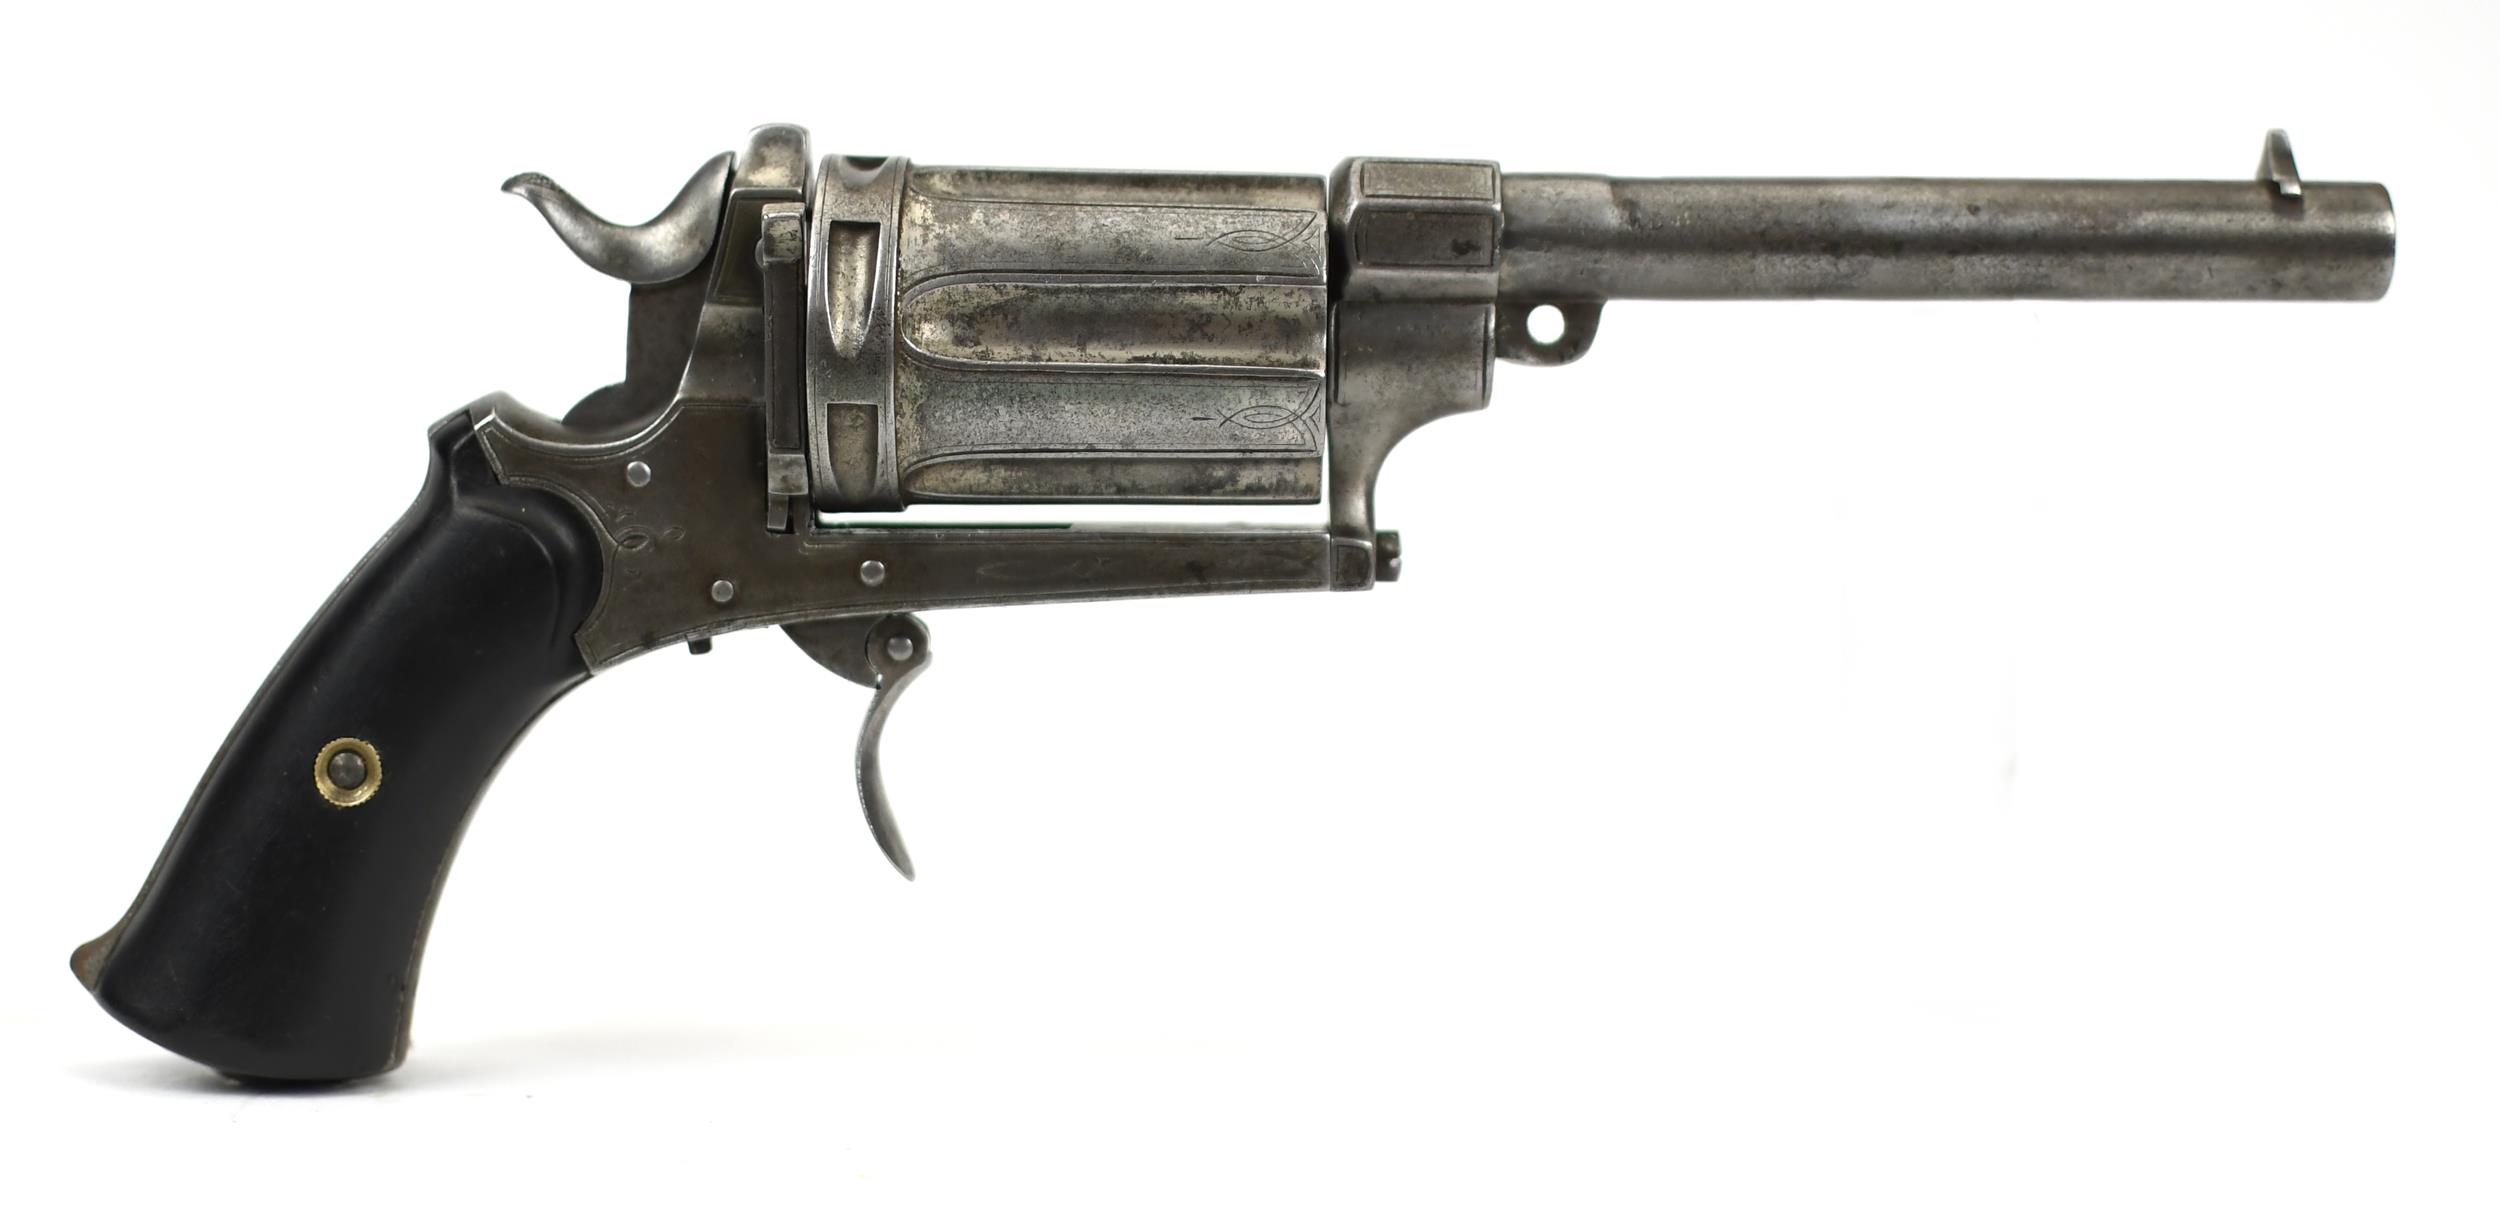 19TH C. ENGRAVED REVOLVER. A 19th C.